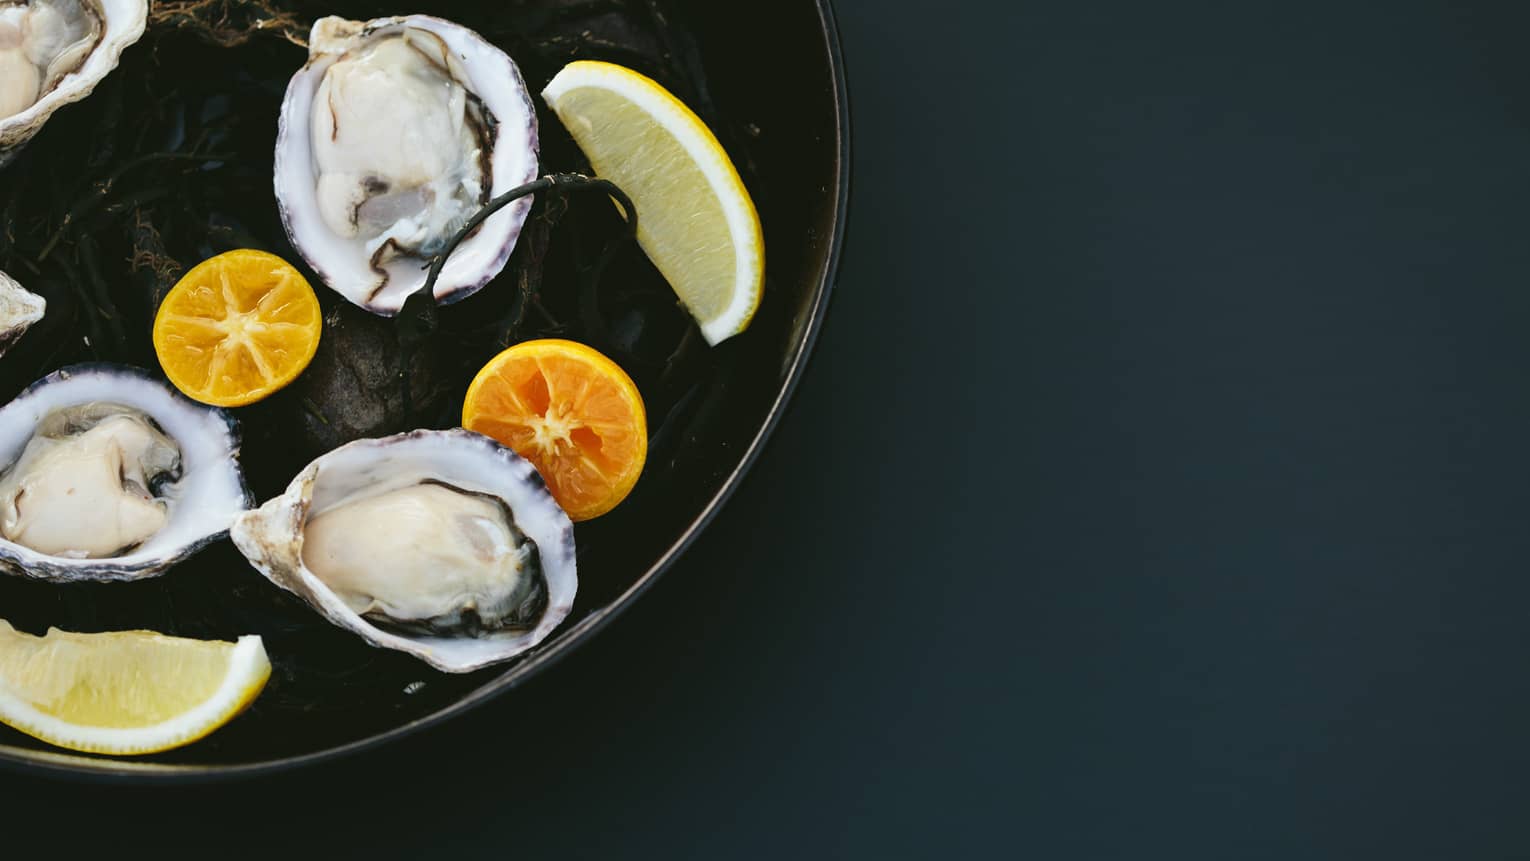 Oyster dish with citrus